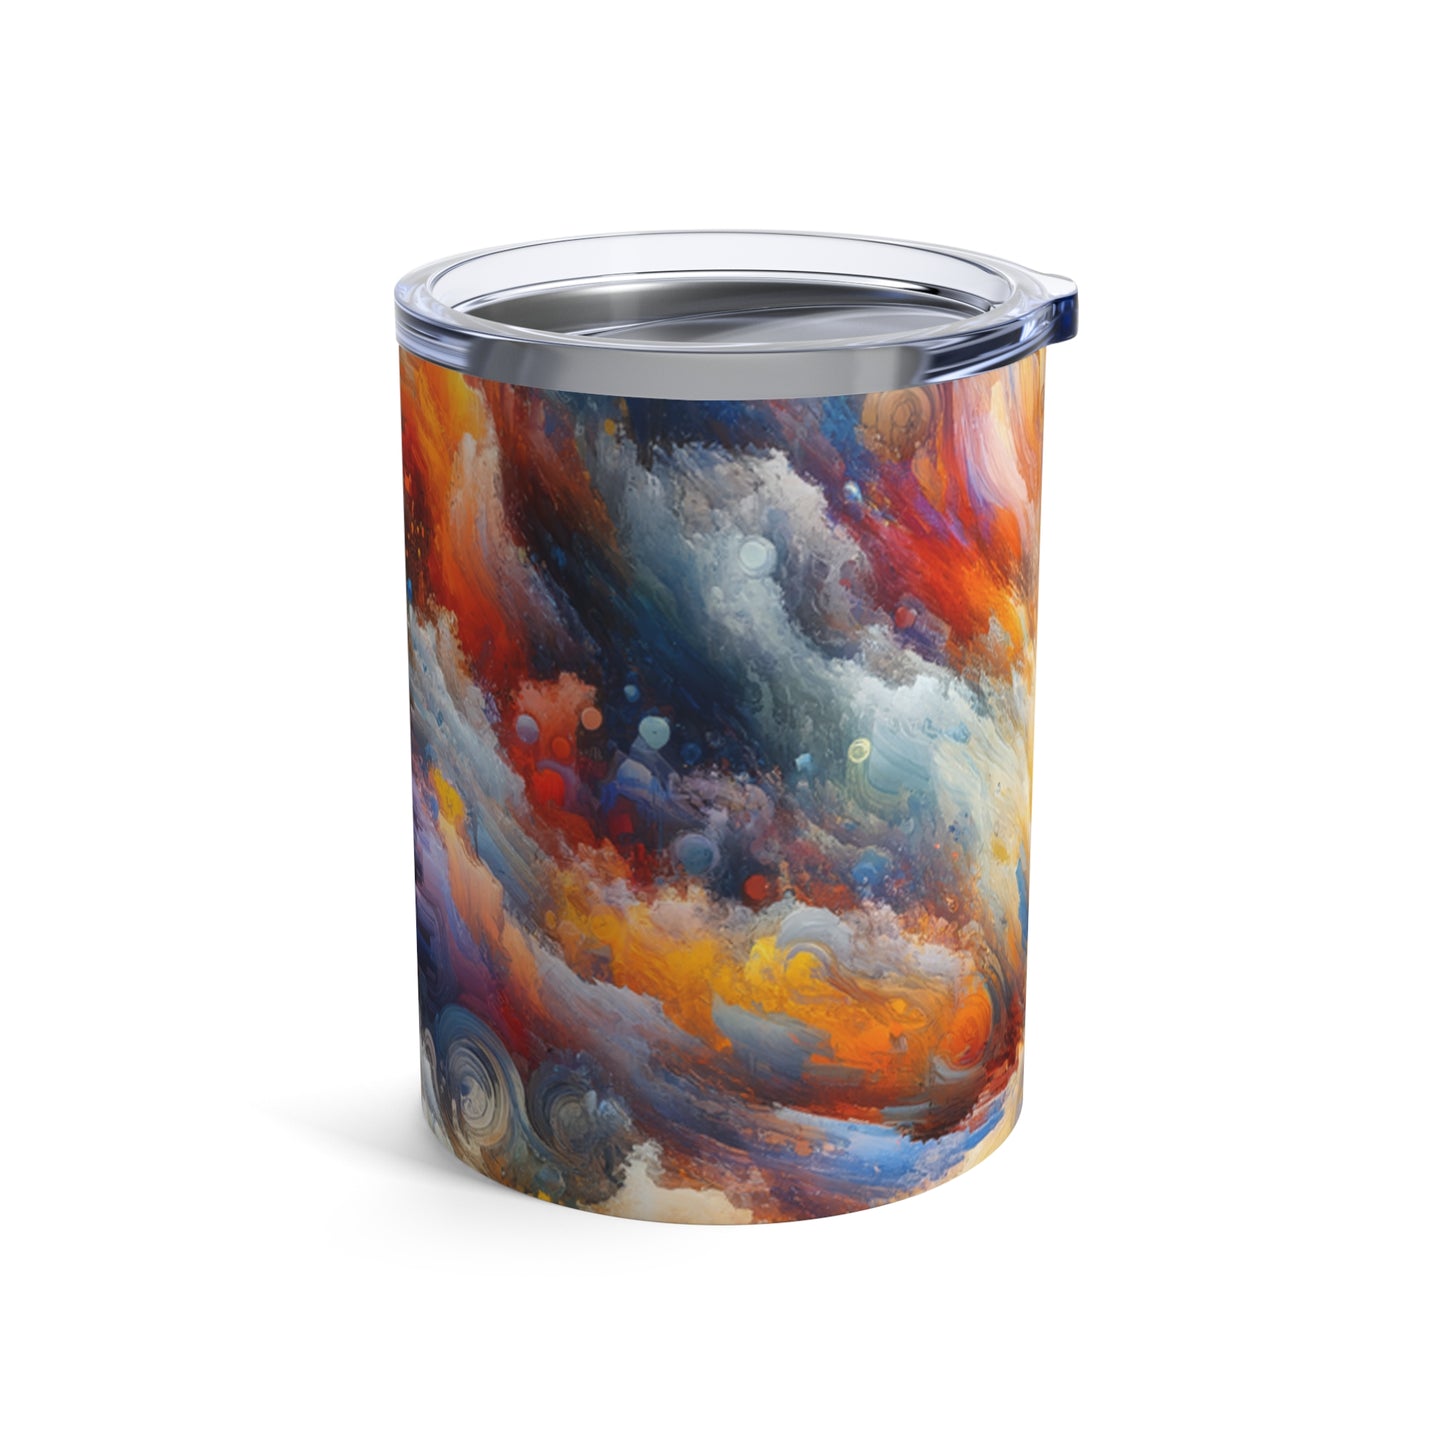 "Vibrant Chaos". - The Alien Tumbler 10oz Abstract Expressionism Style